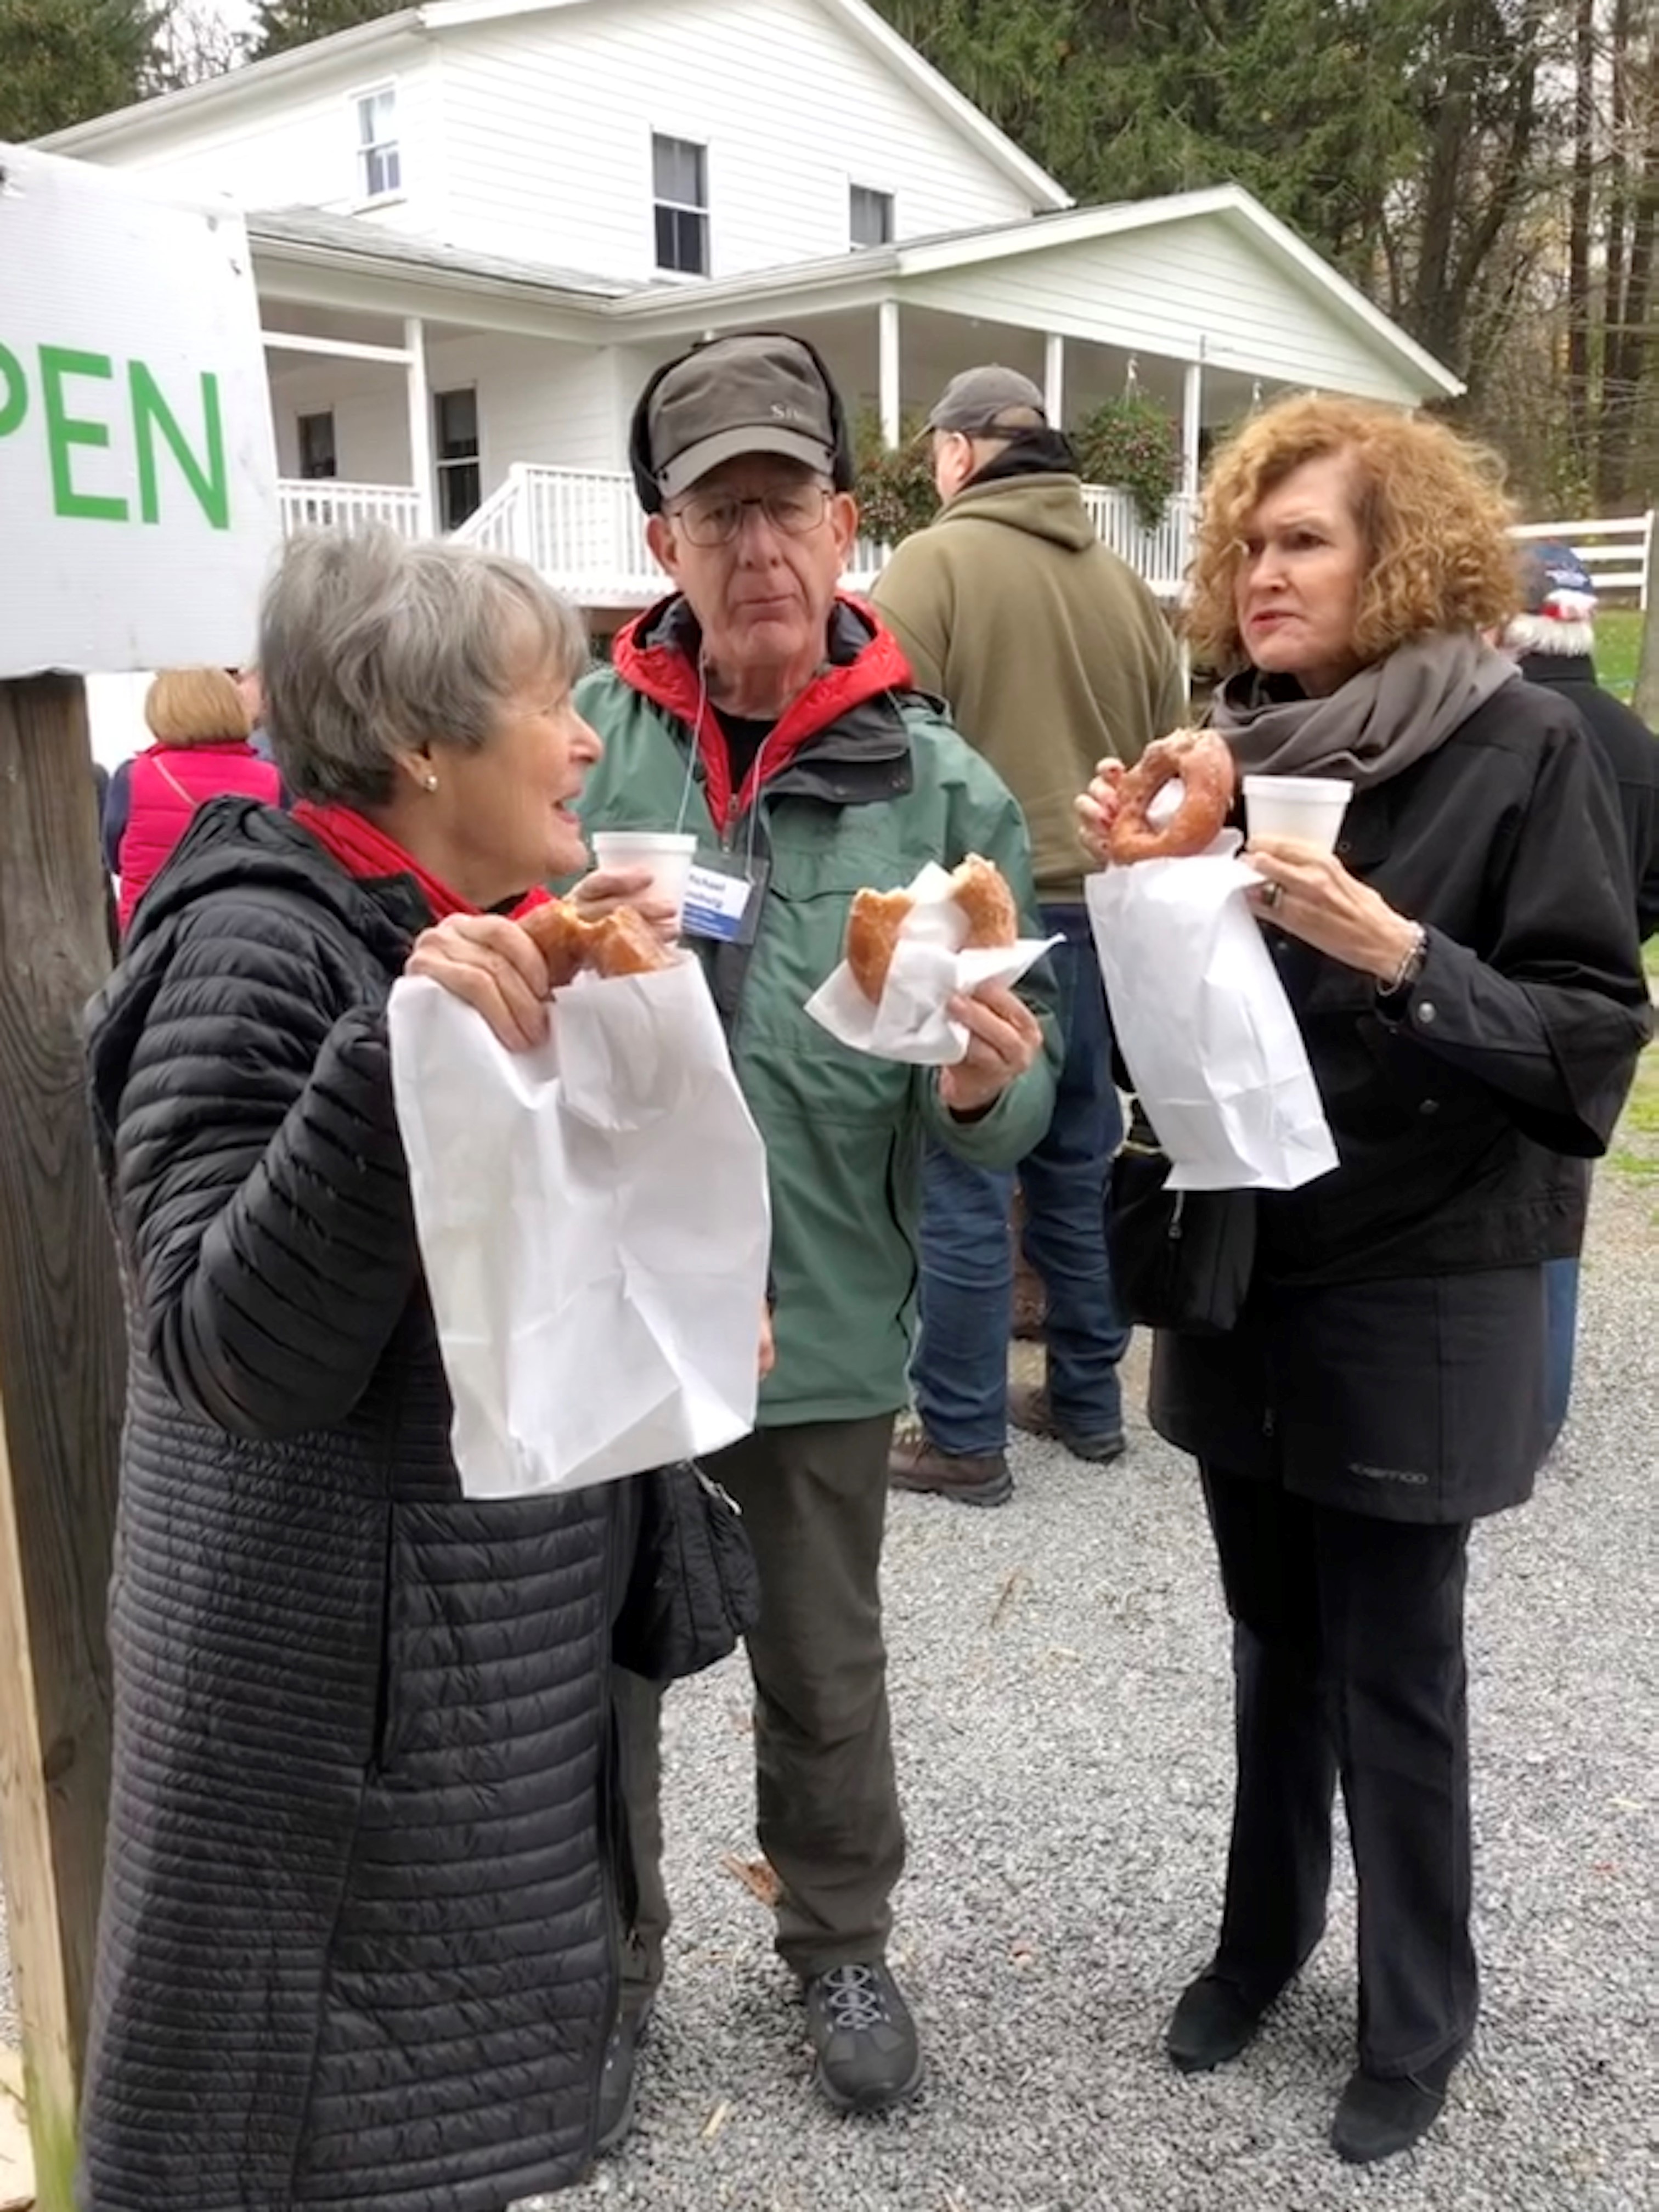 Trip goers eating apple cider donuts